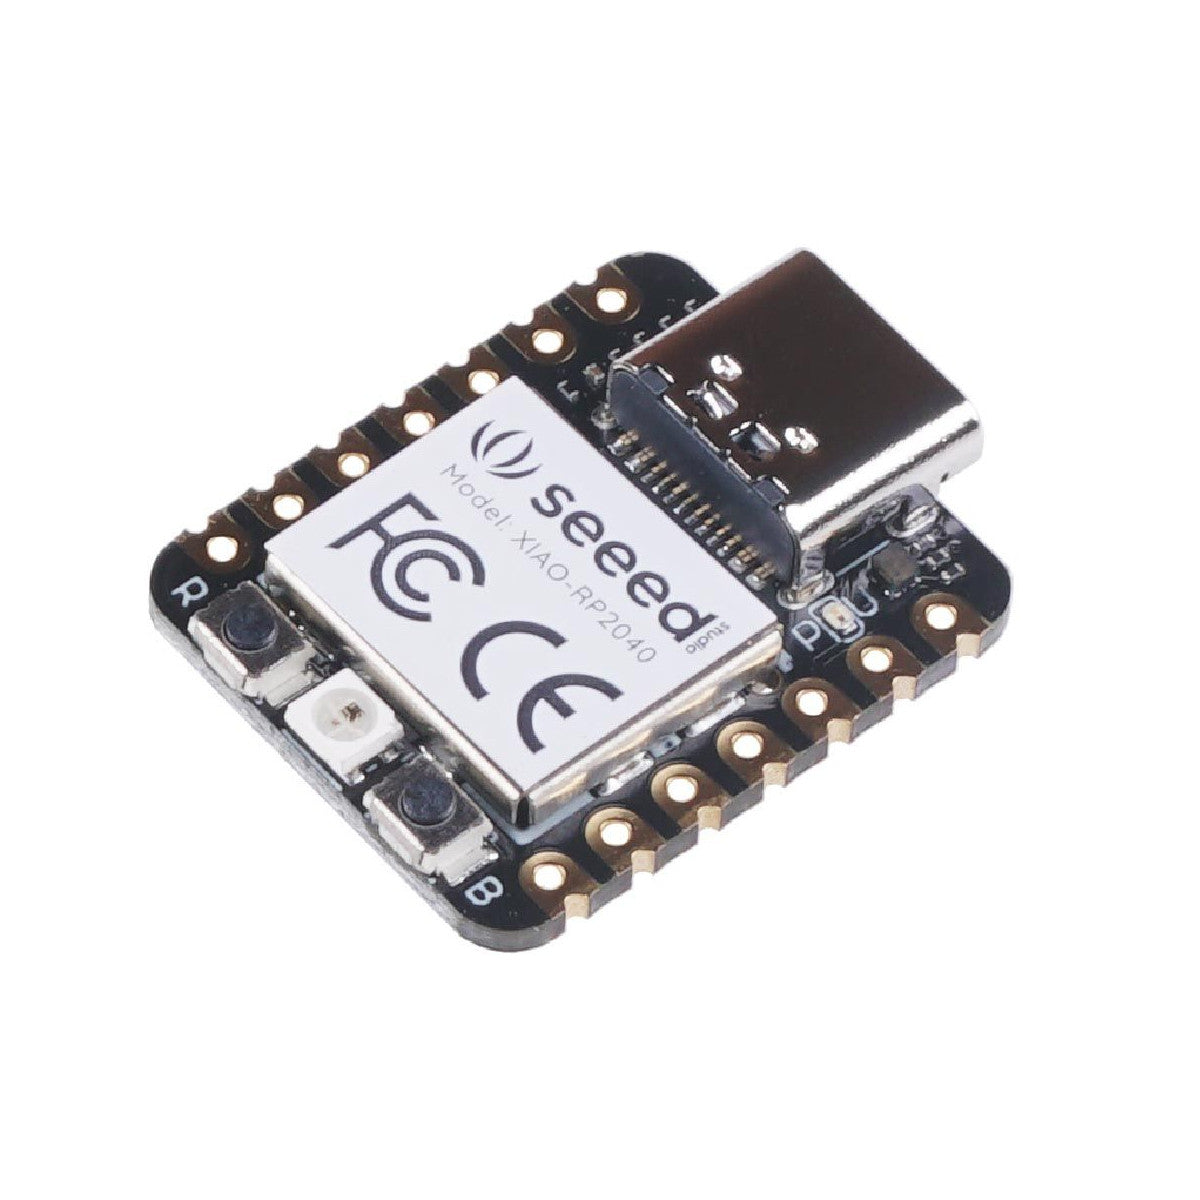 Seeed Studio XIAO RP2040, Supports Arduino, MicroPython and CircuitPython